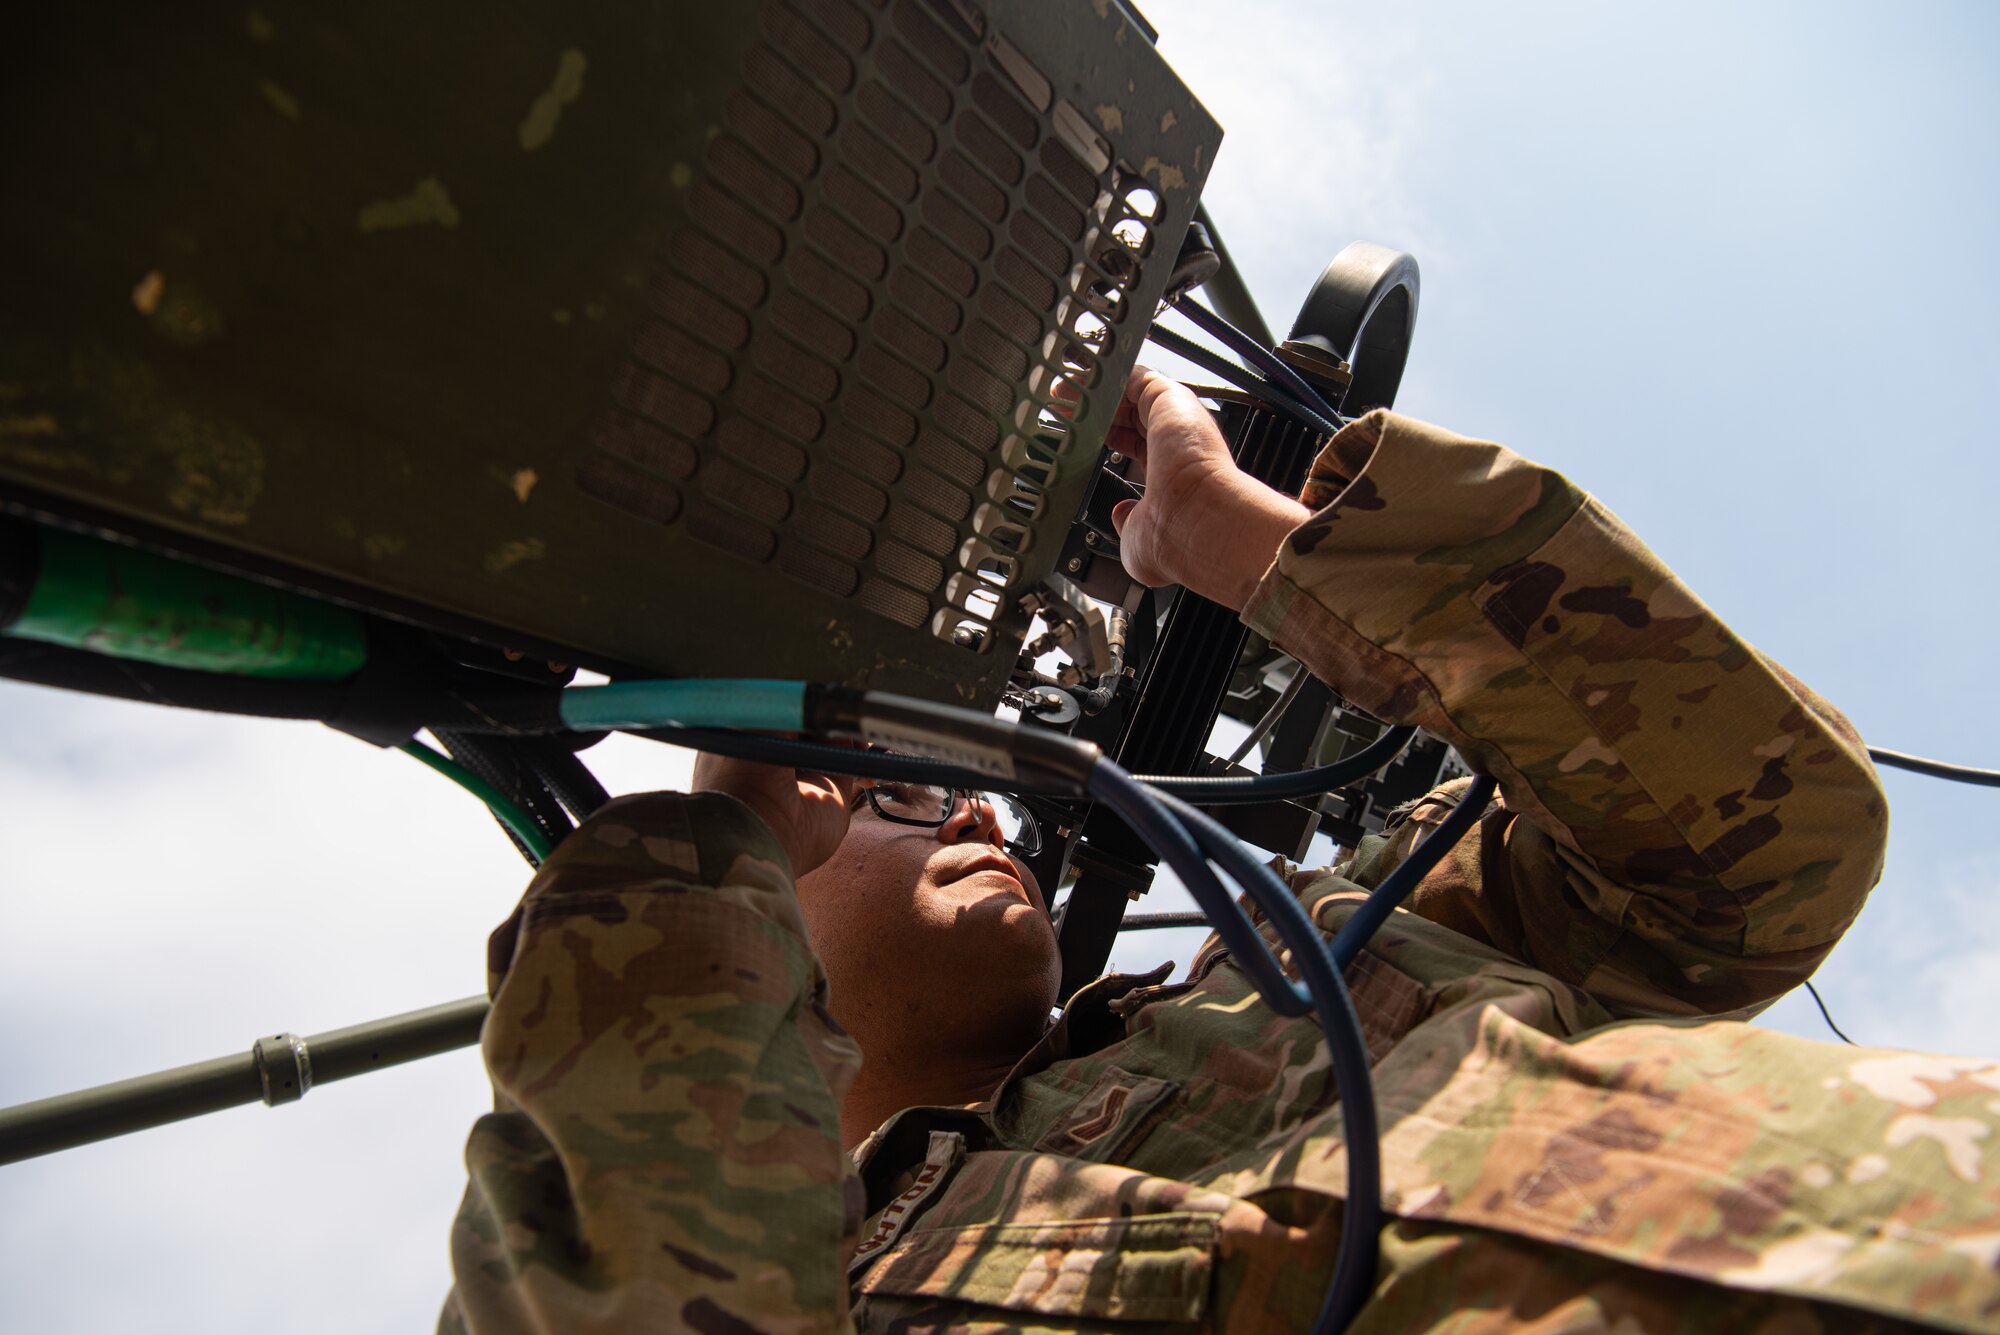 Staff Sgt. Tyler McNaughton, 51st Communications Squadron radio frequency transmission supervisor, works on a Very Small Aperture Antenna (VSAT) during a resiliency exercise at Osan Air Base, Republic of Korea, Oct. 6, 2021.